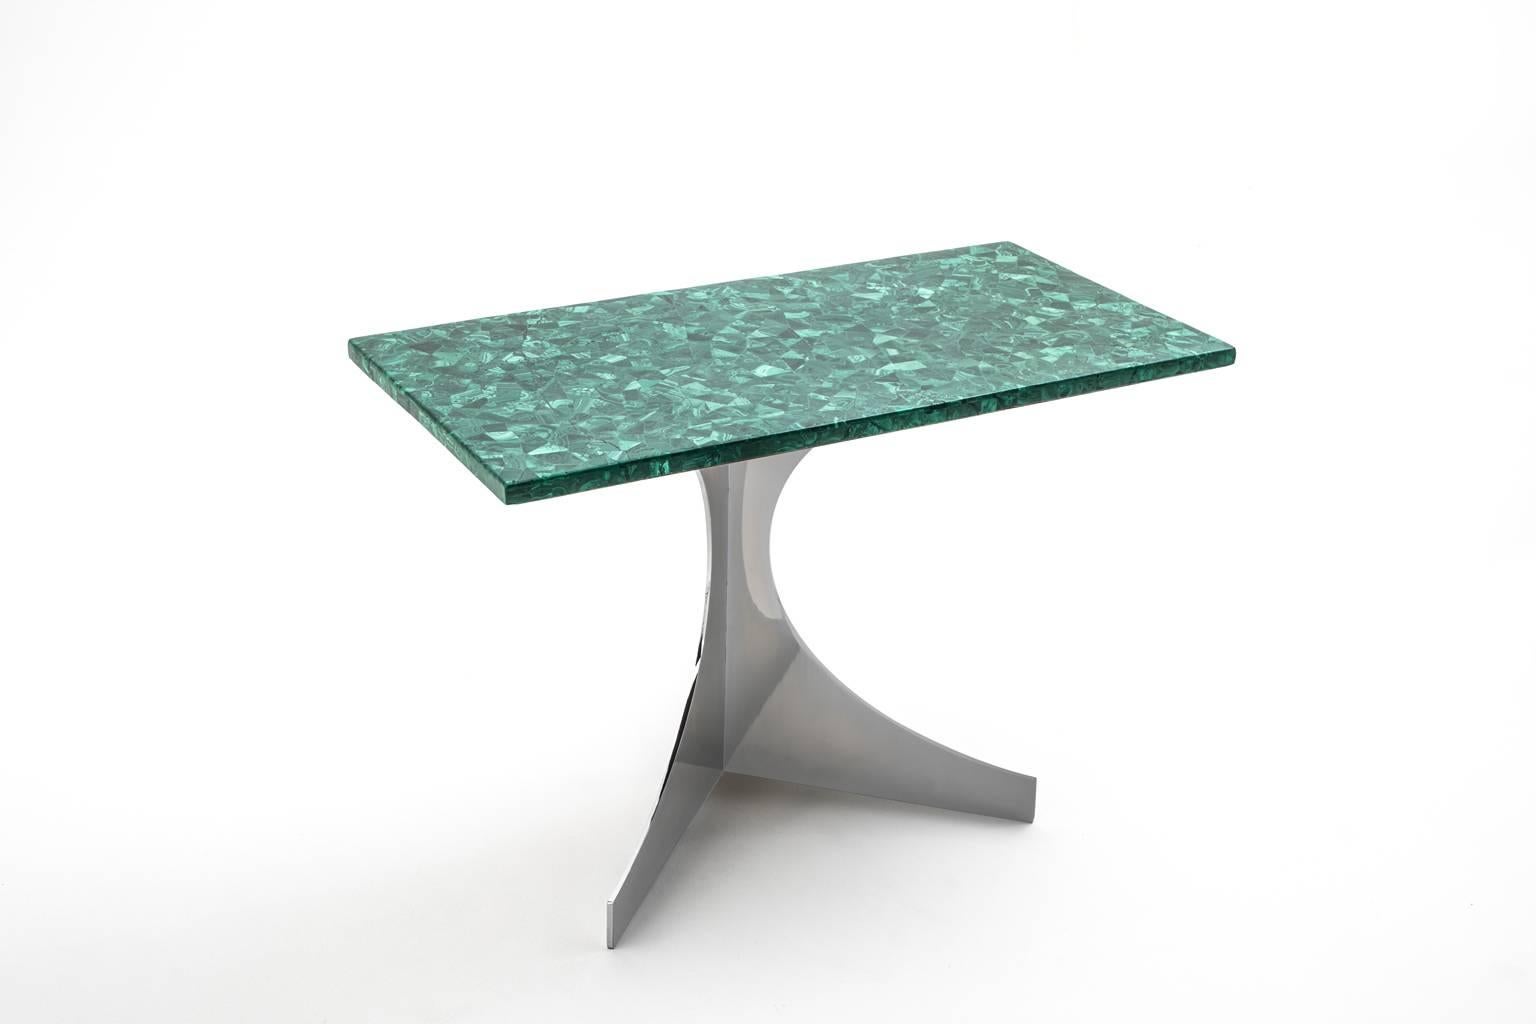 Stunning malachite side table by N. Effront, France, 1970.
Sculptural chrome-plated metal base with a marvellous Malachite top compiled from small pieces of Malachite. In excellent condition.
   